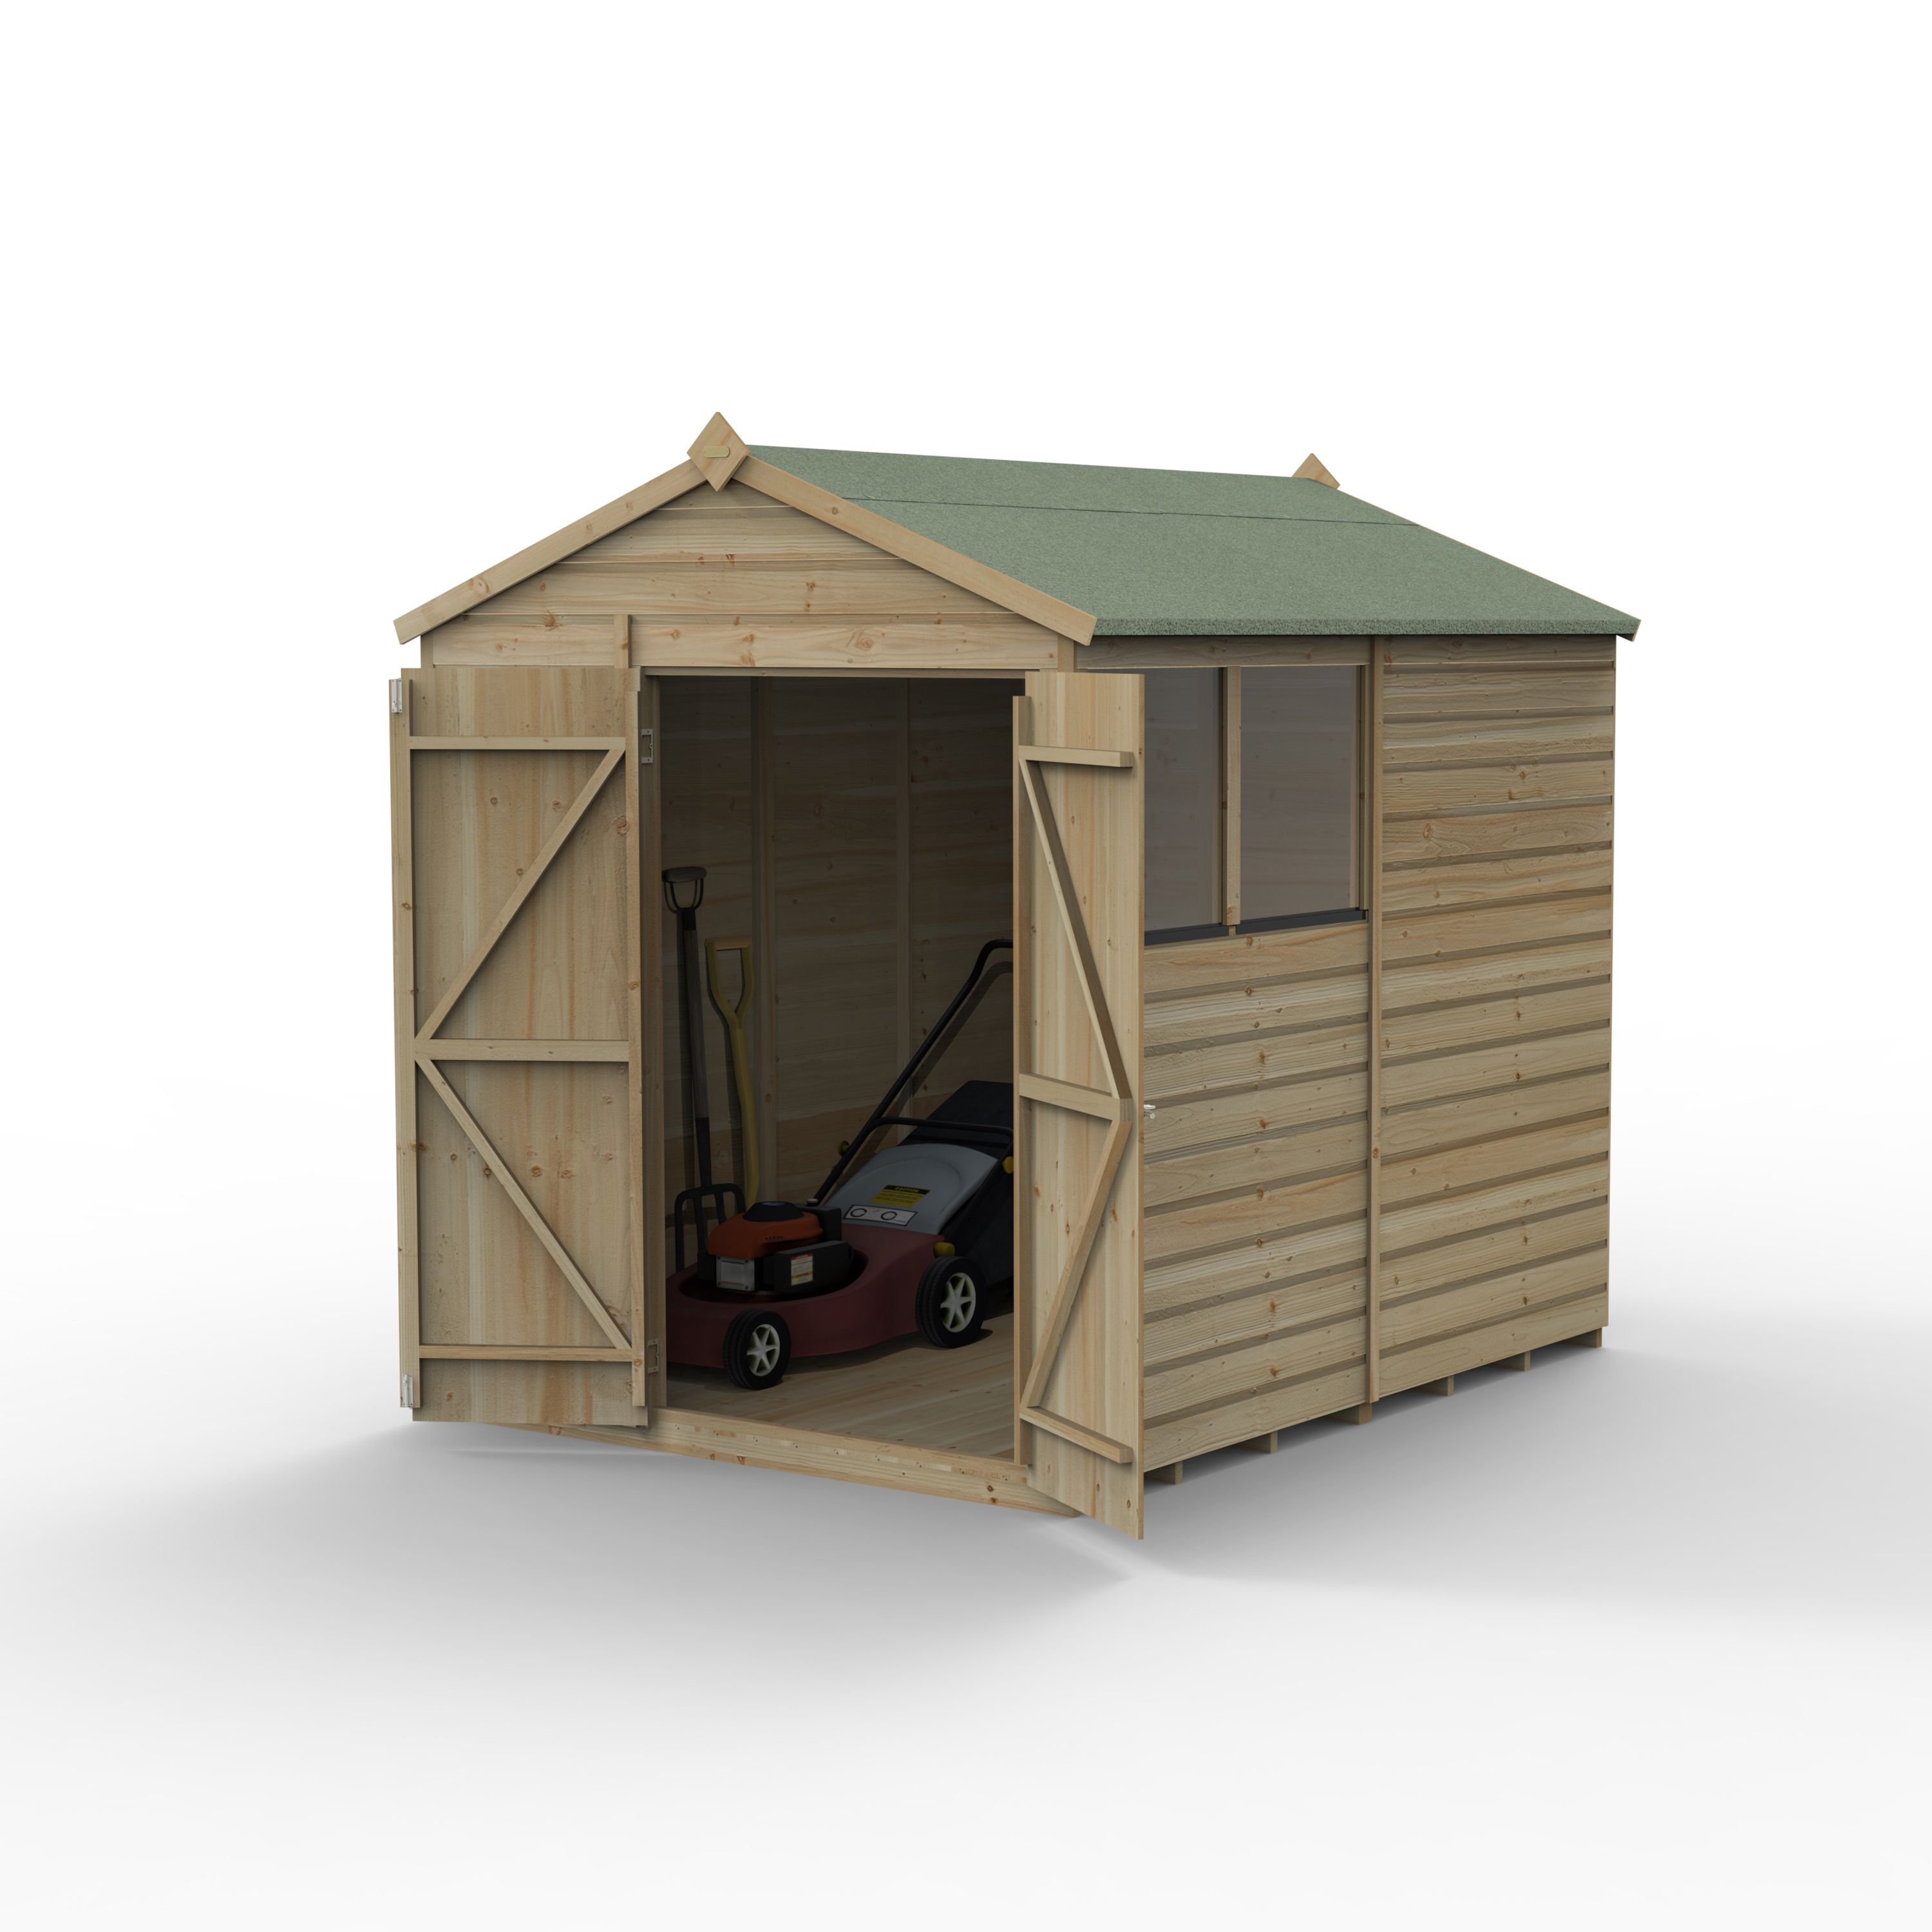 Forest Garden Beckwood 8x6 ft Apex Natural timber Wooden 2 door Shed with floor & 2 windows - Assembly not required